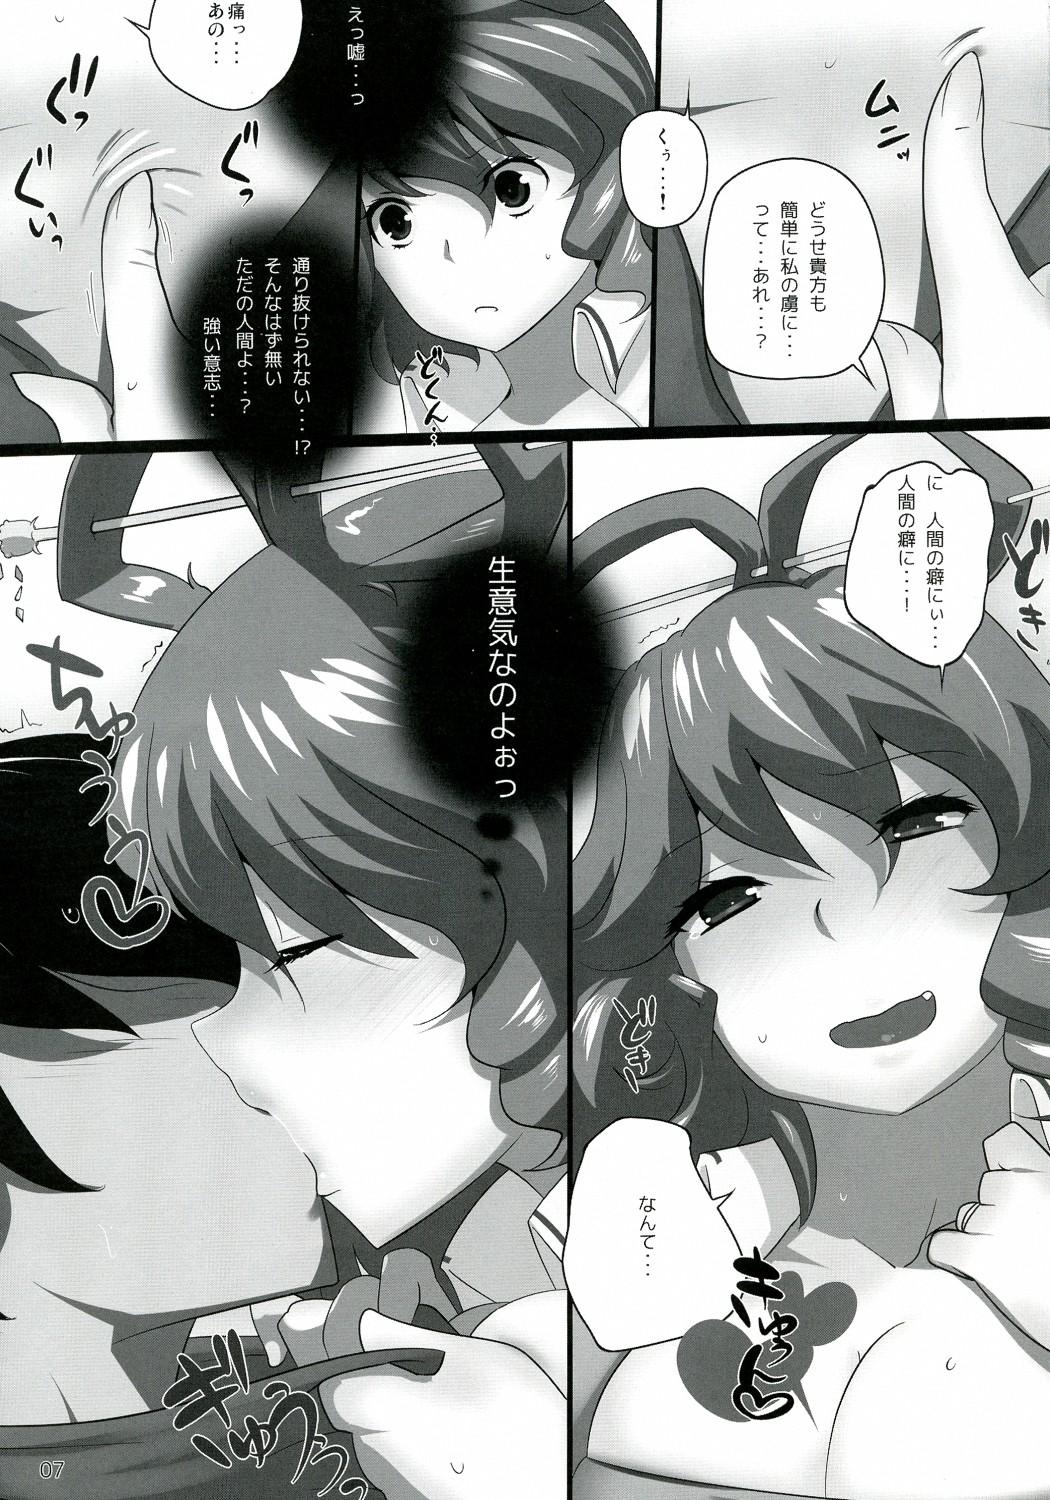 Vagina Touhou Derebitch 9 - Touhou project Role Play - Page 7